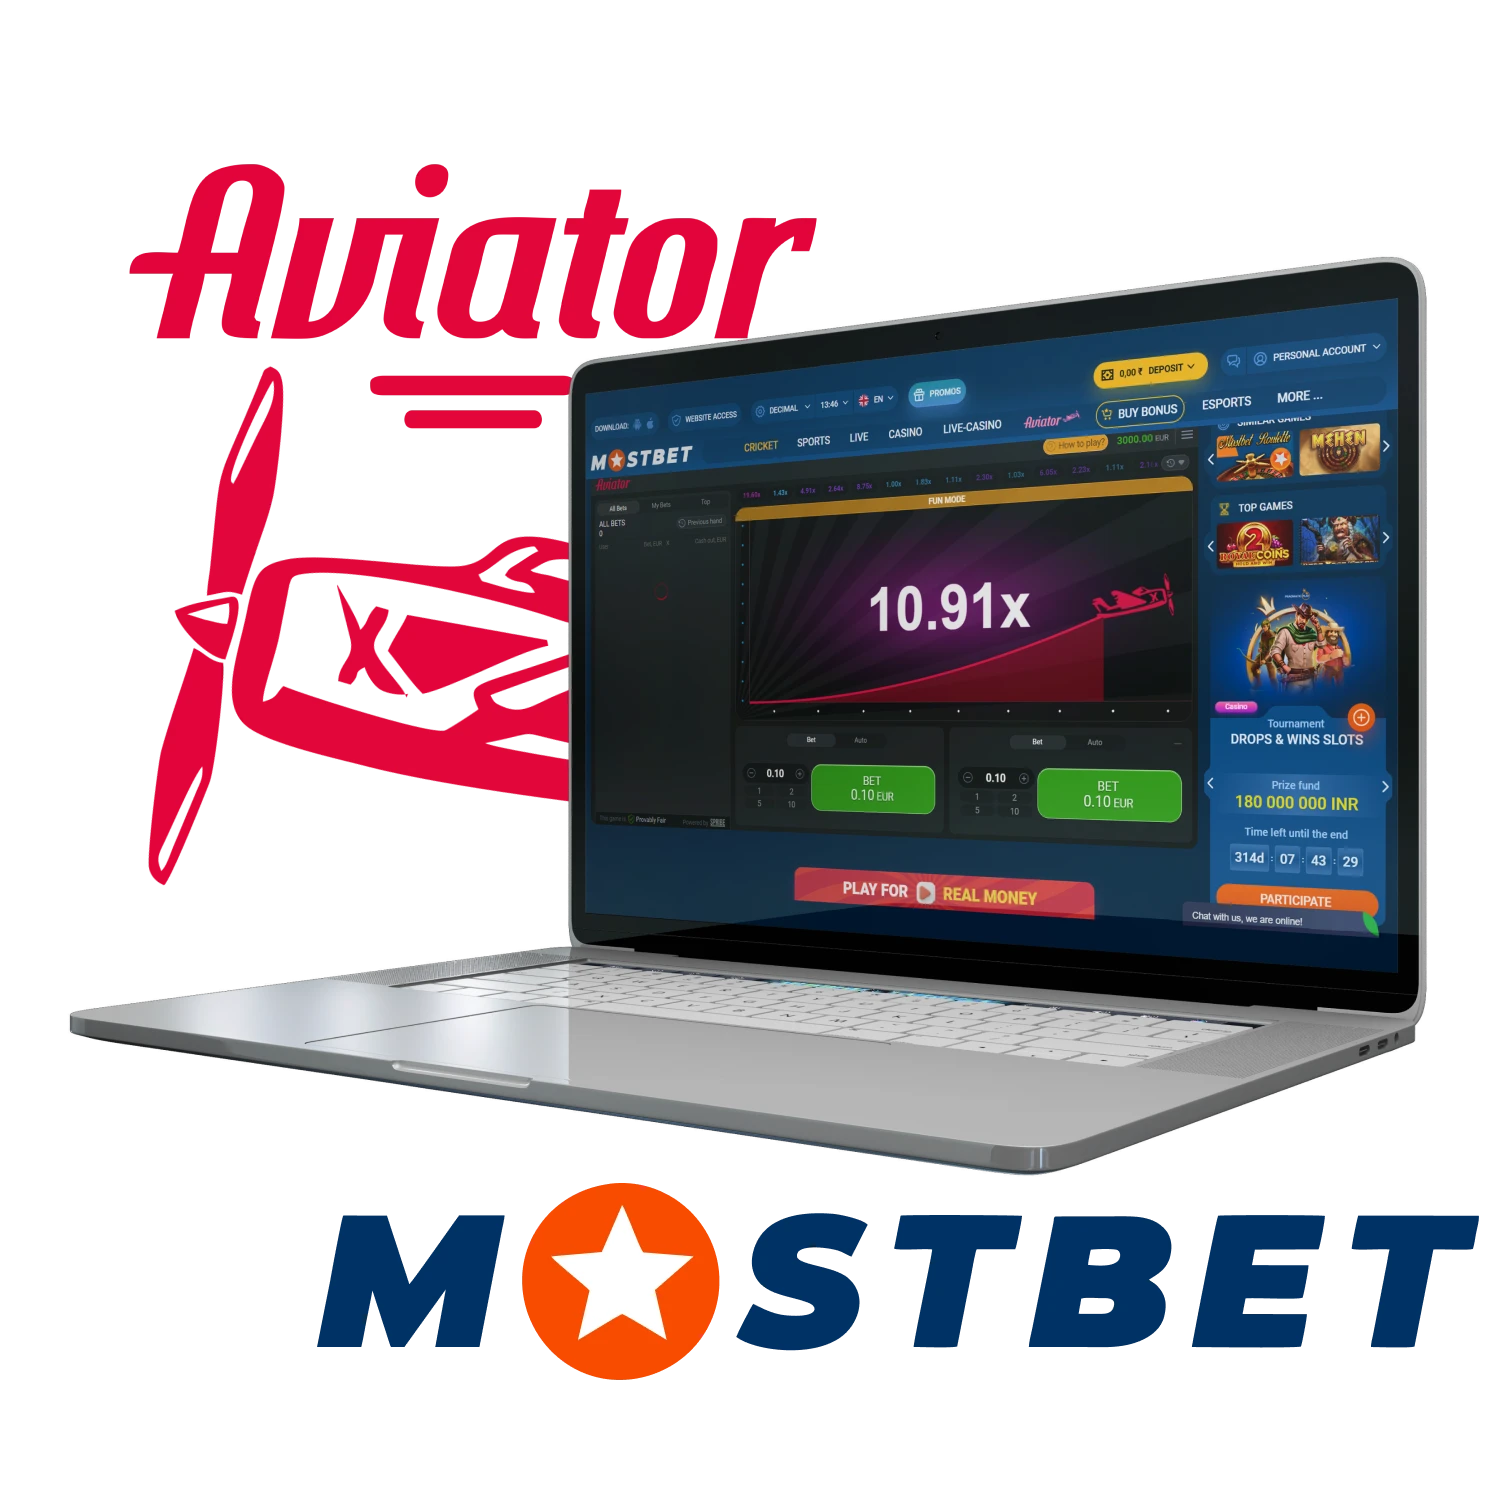 Free Advice On Mostbet provides a comprehensive online betting experience, combining the ease of access with a wide array of gaming options. Whether it’s the user-friendly Mostbet login, the diverse offerings of Mostbet Casino, or insights into the top football betting